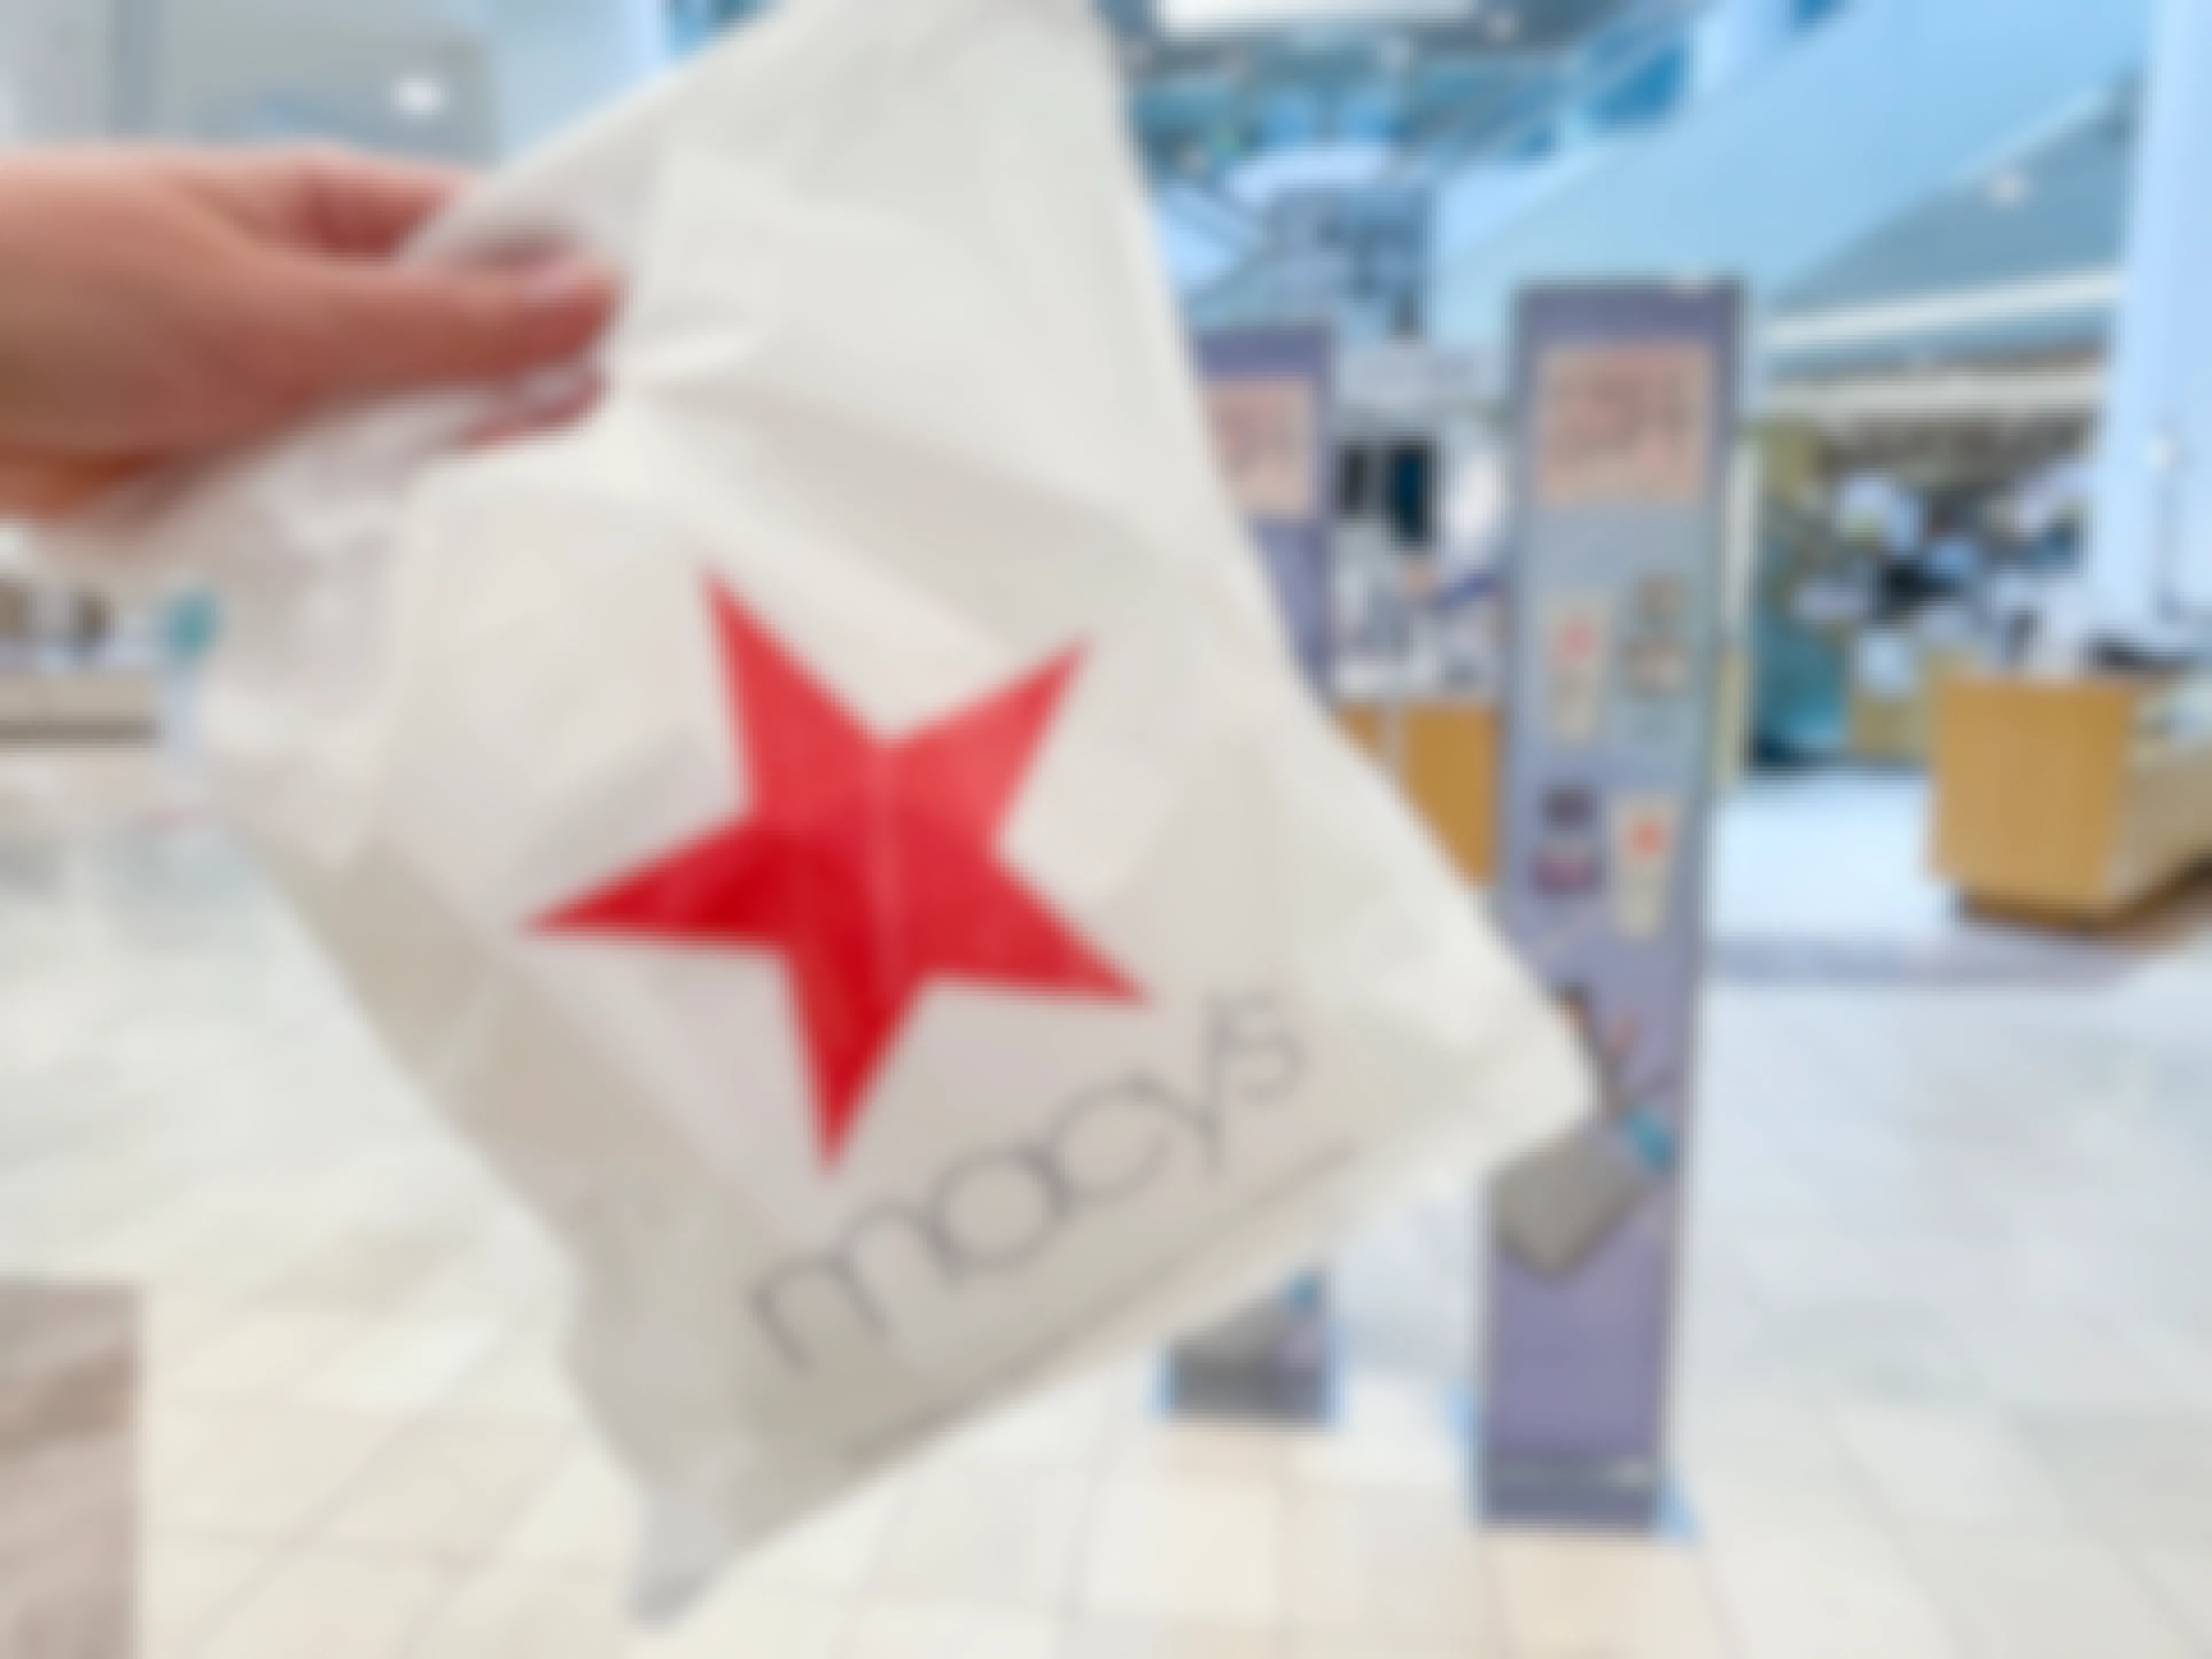 Macy's shopping bag held in front of the cosmetic section.